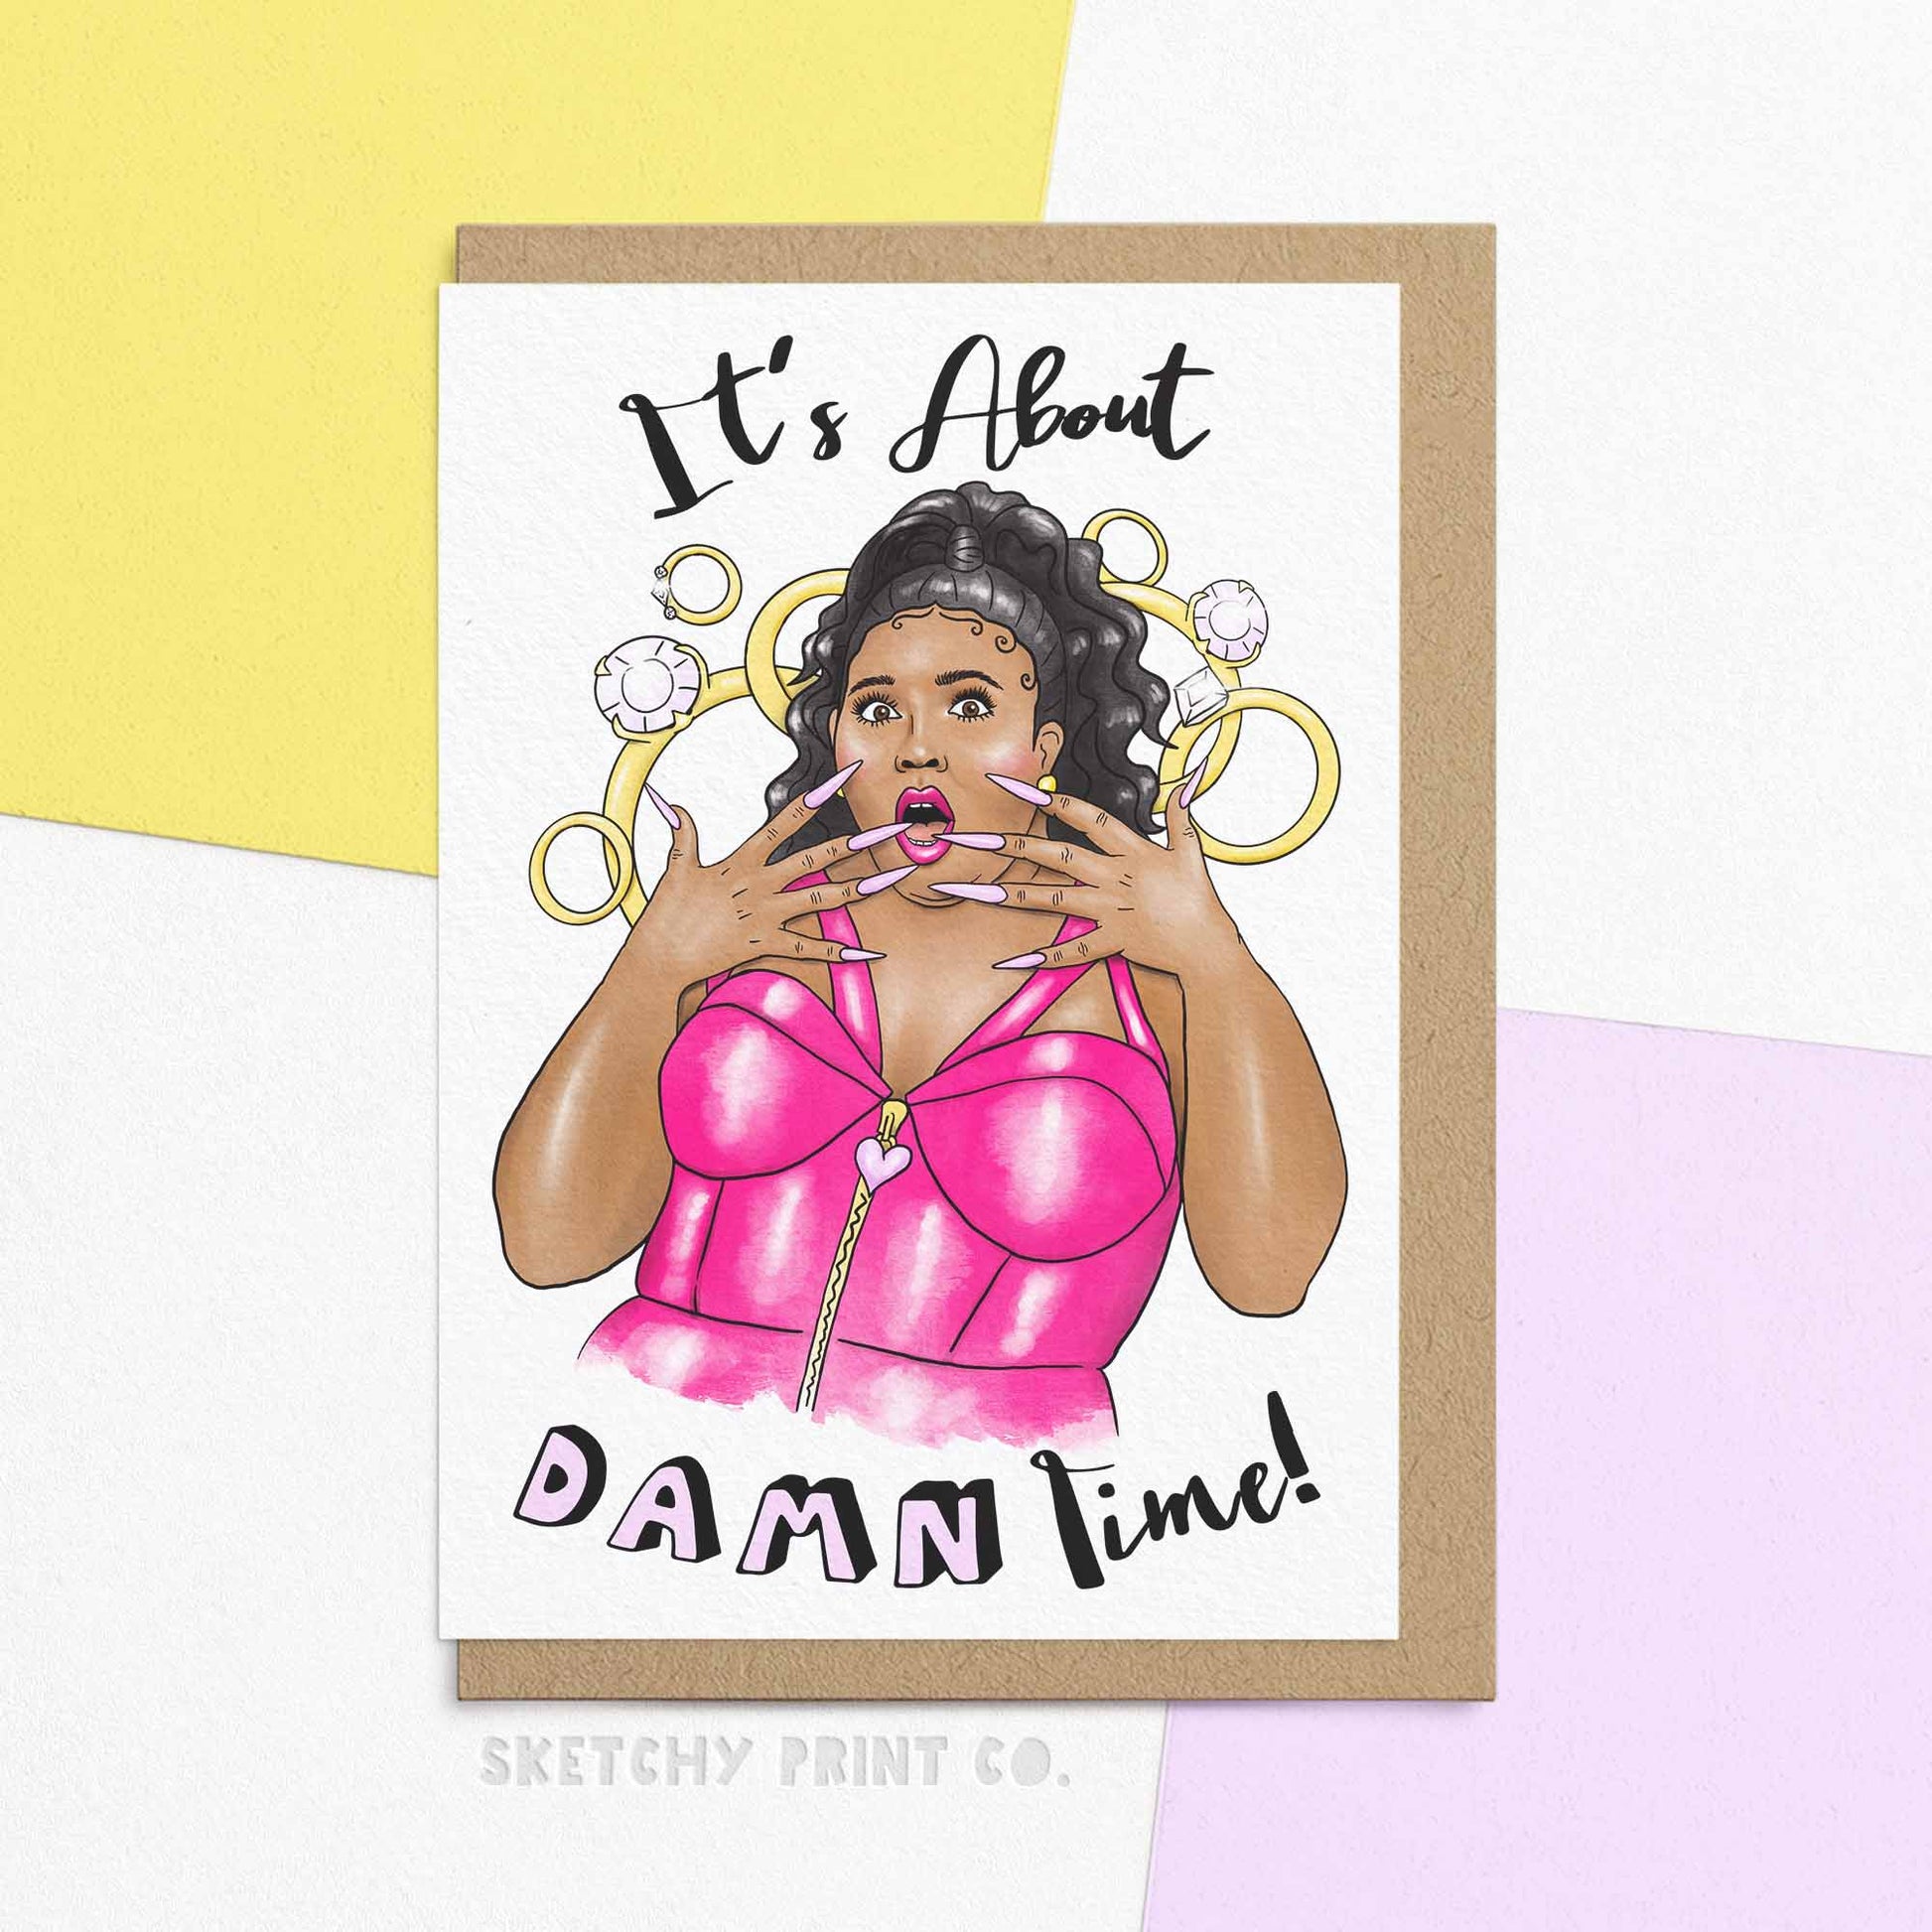 funny engagement greetings for wedding couple. cute engagement announcement card featuring a illustration of a surprised woman of colour, with text reading 'its about damn time!'